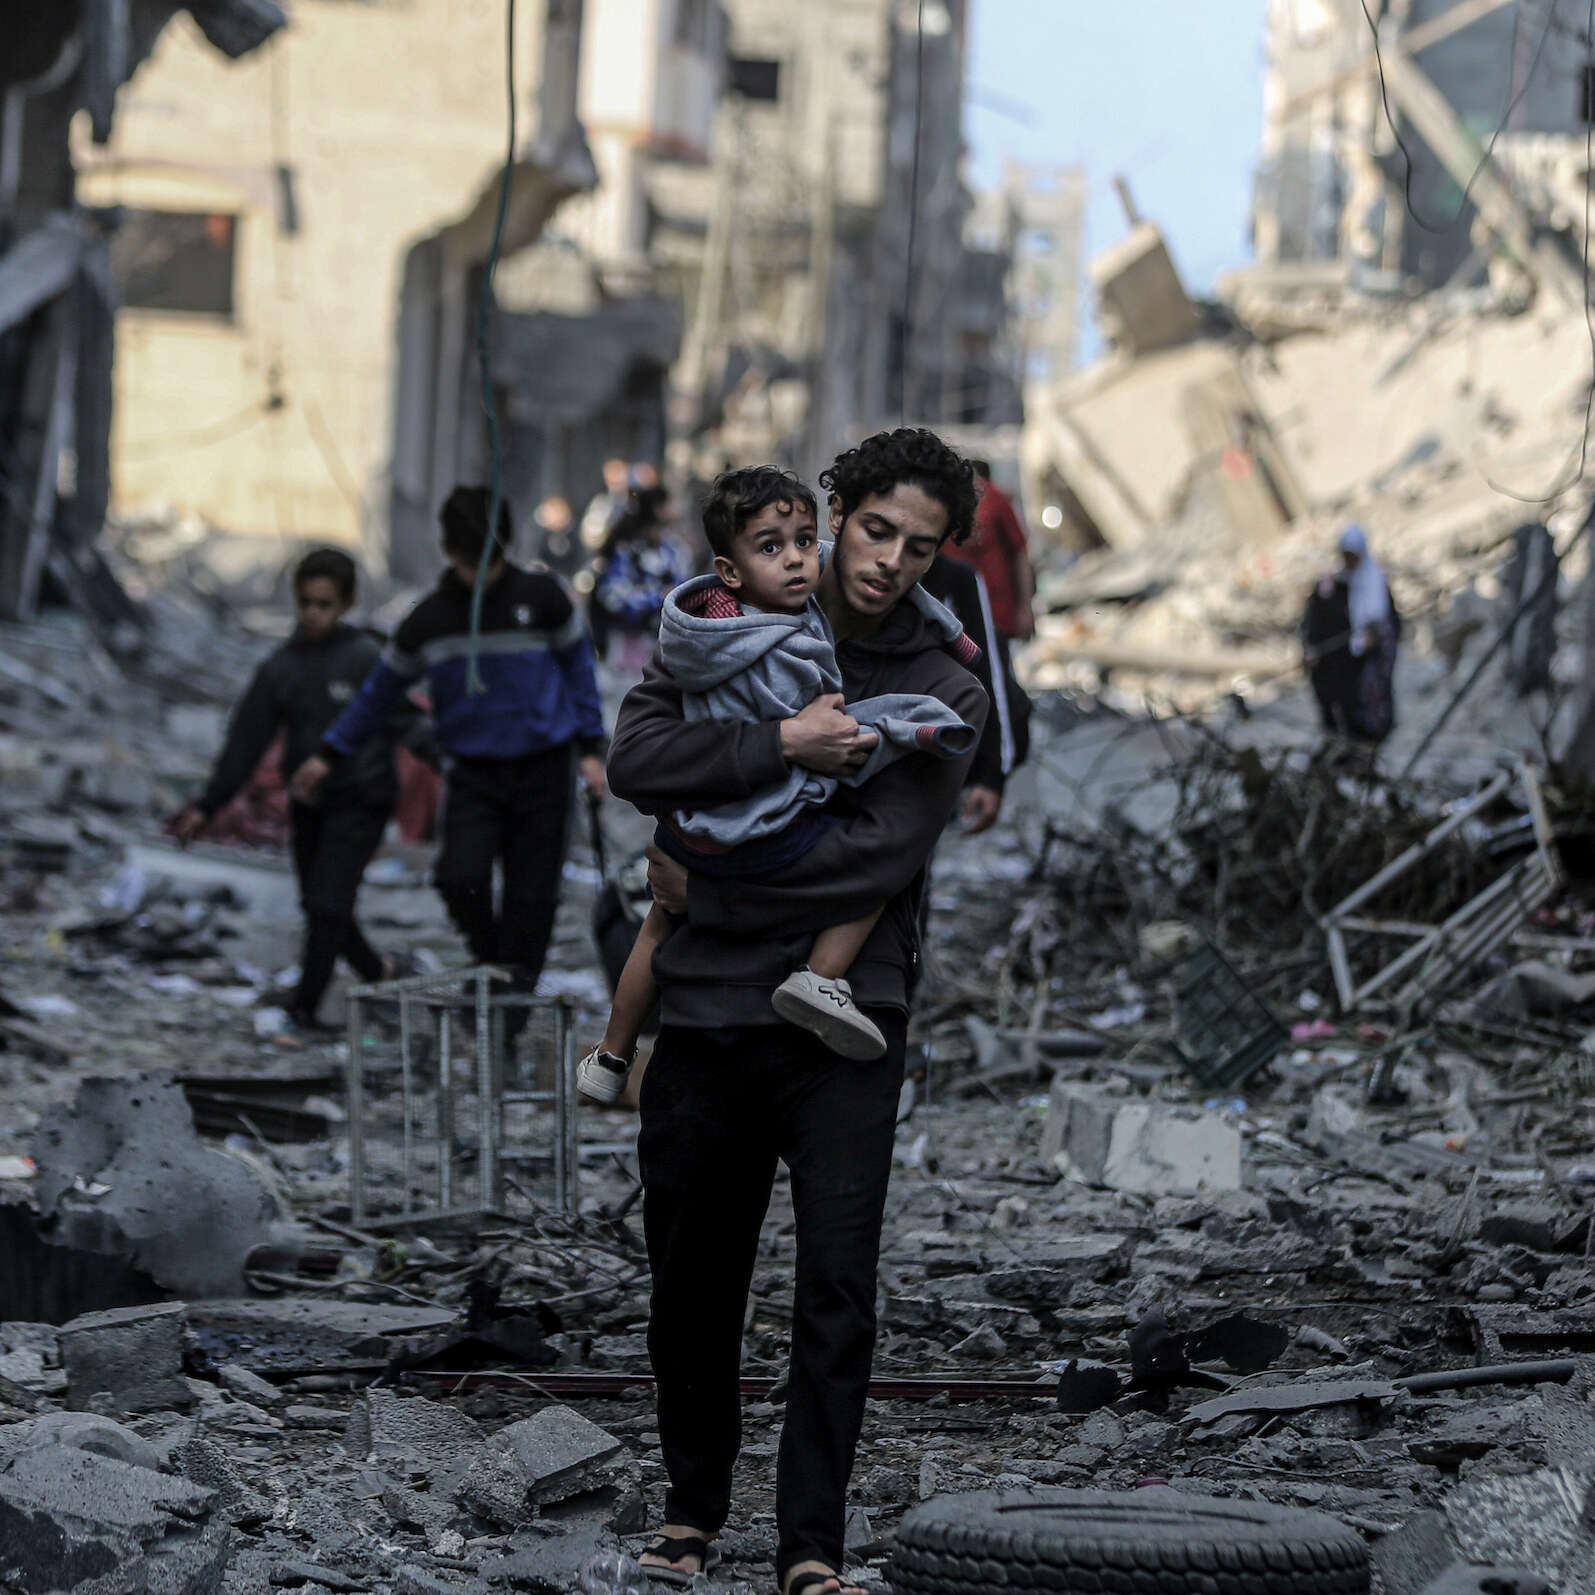 Palestinians in Gaza walk through the rubble, trying to find safety during the conflict between Israel and Hamas.